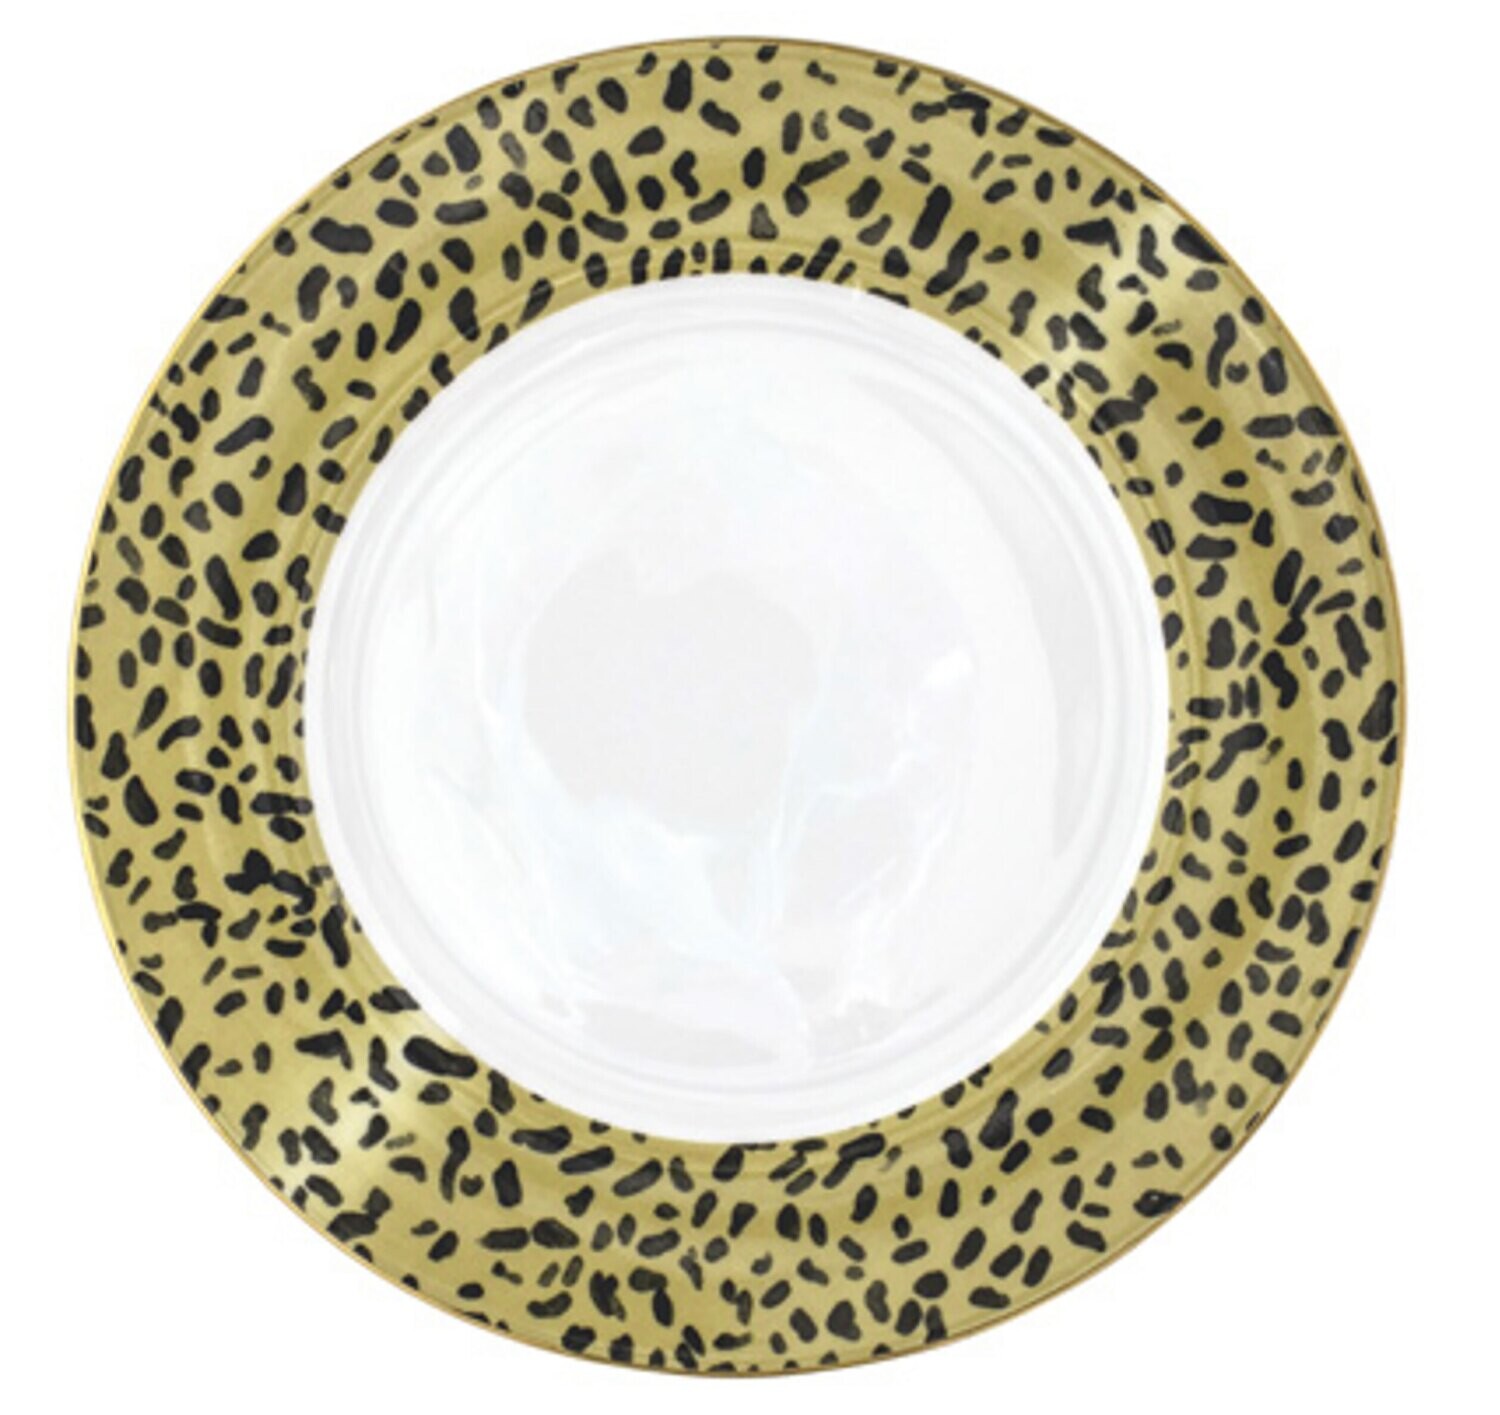 Halcyon Days TR Leopard 6 Inch Plate BCTRA016PG